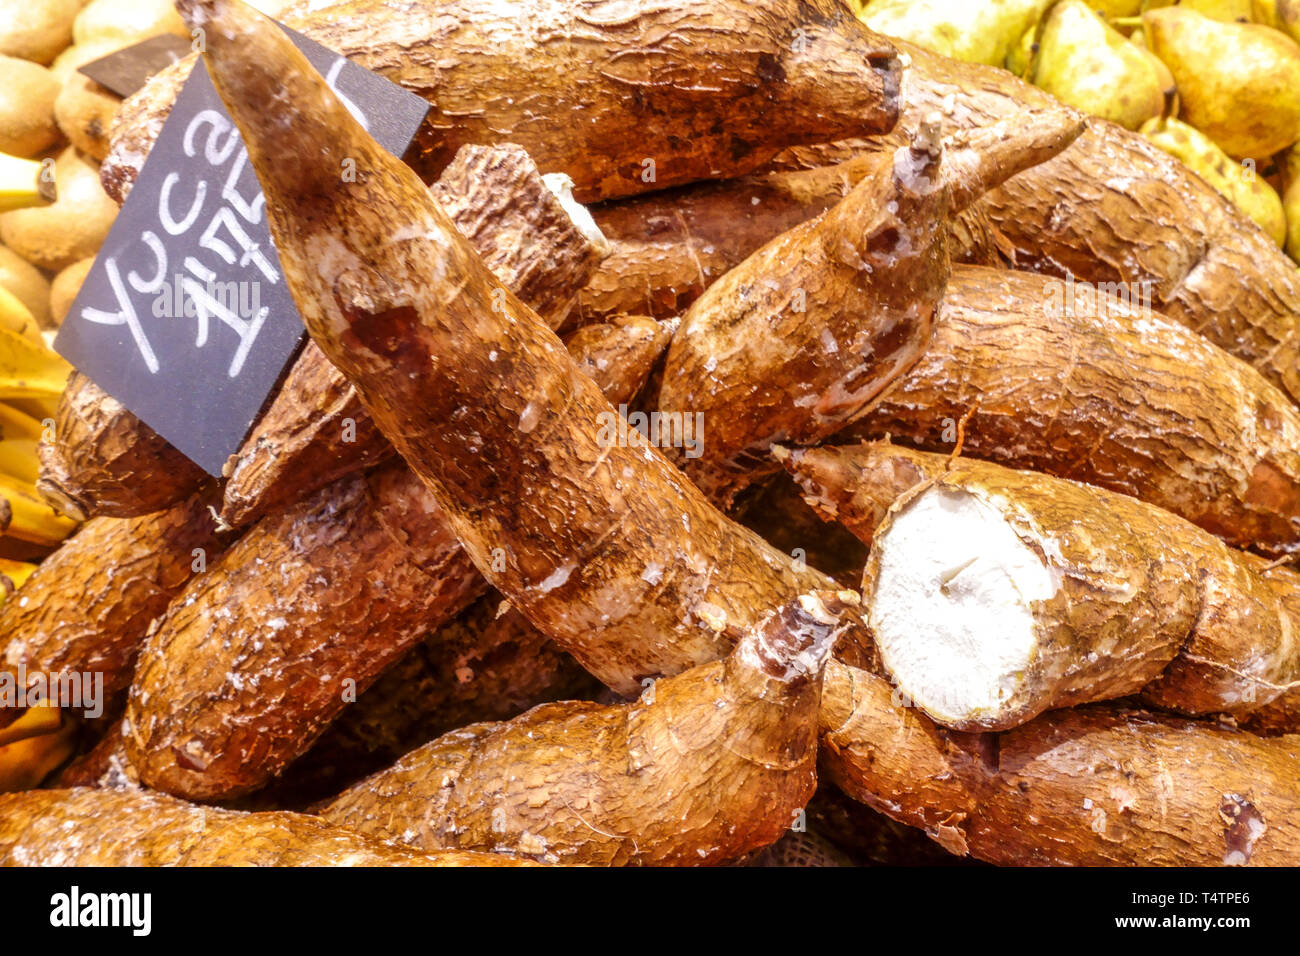 Vegetable market yucca root roots Stock Photo